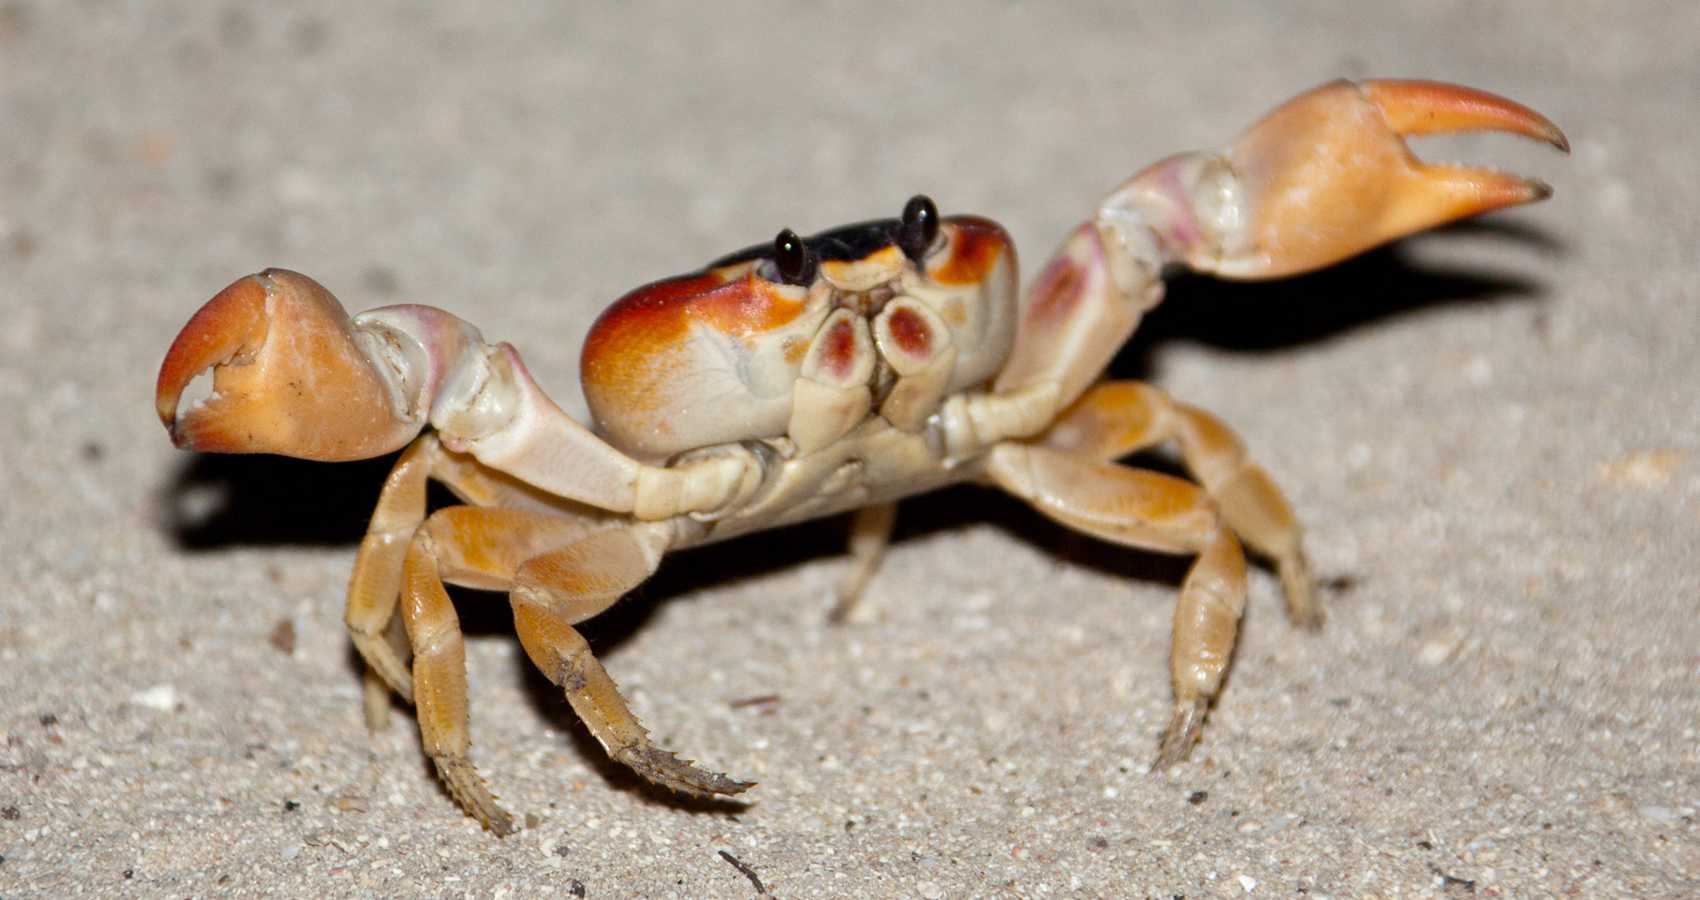 Crab Island, flash fiction by Leslie Rider at Spillwords.com